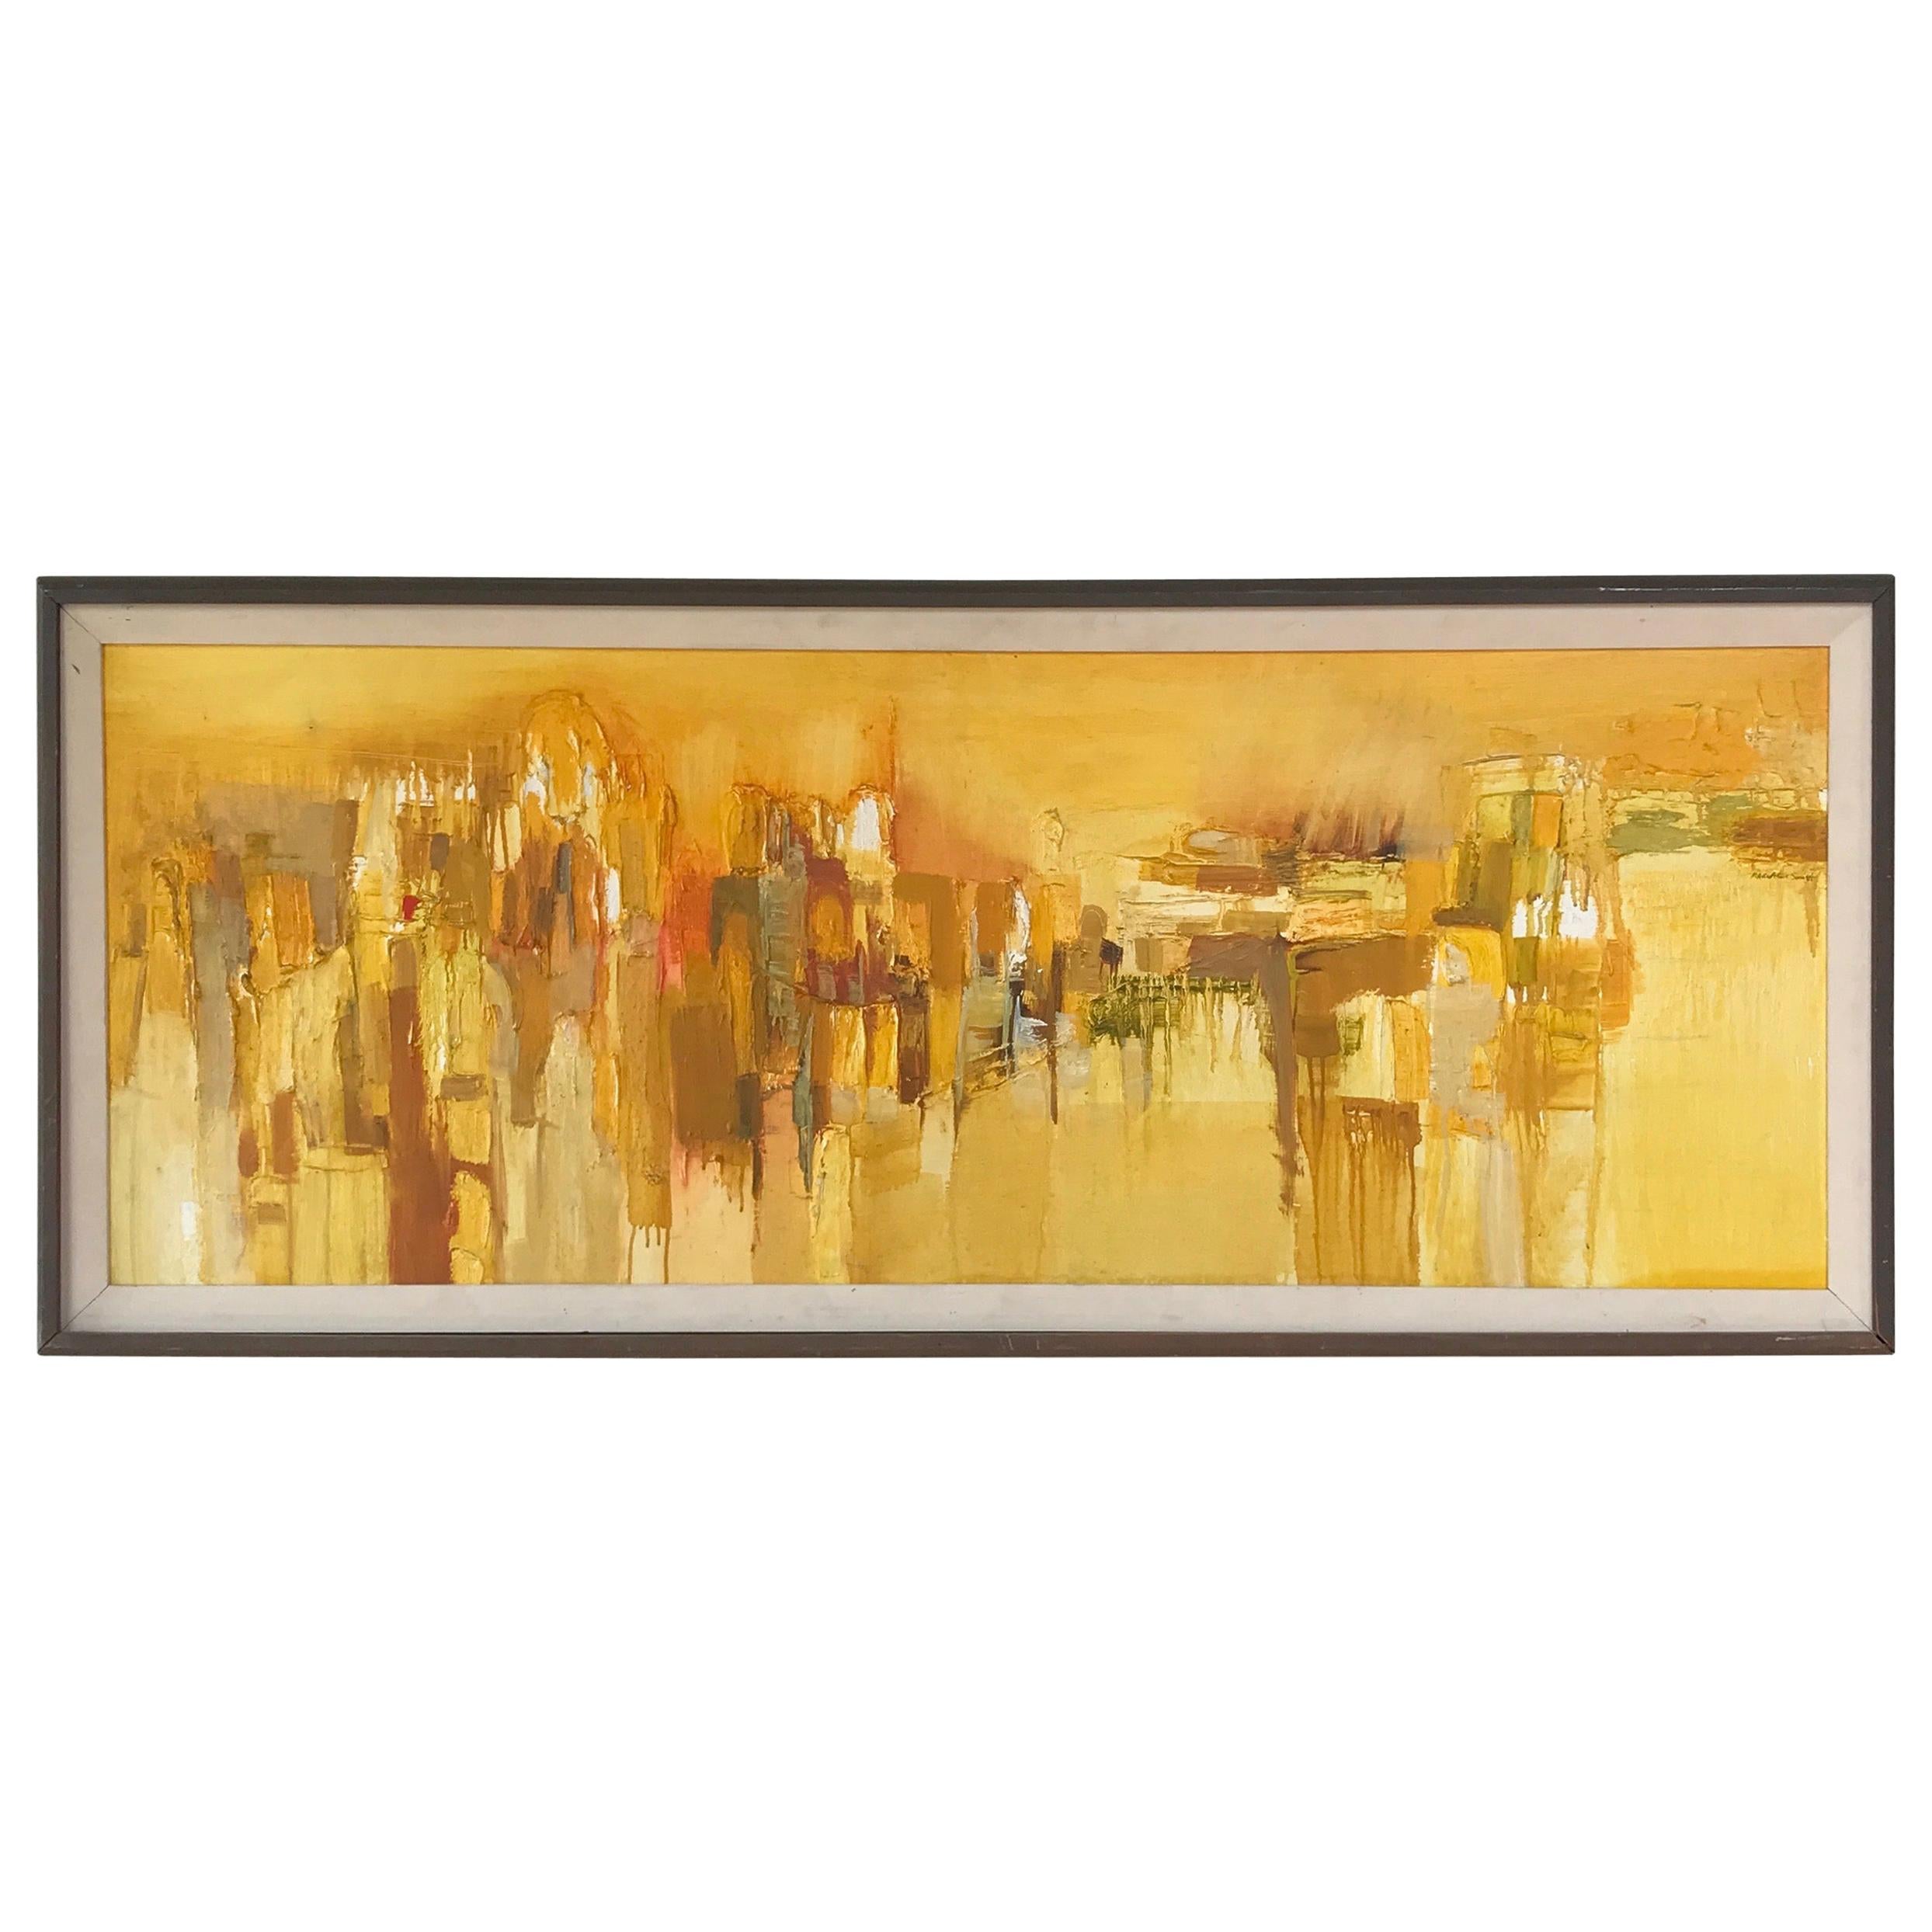 Margaret Smith “Near the Zócalo” Abstract Impressionist Cityscape Oil Painting